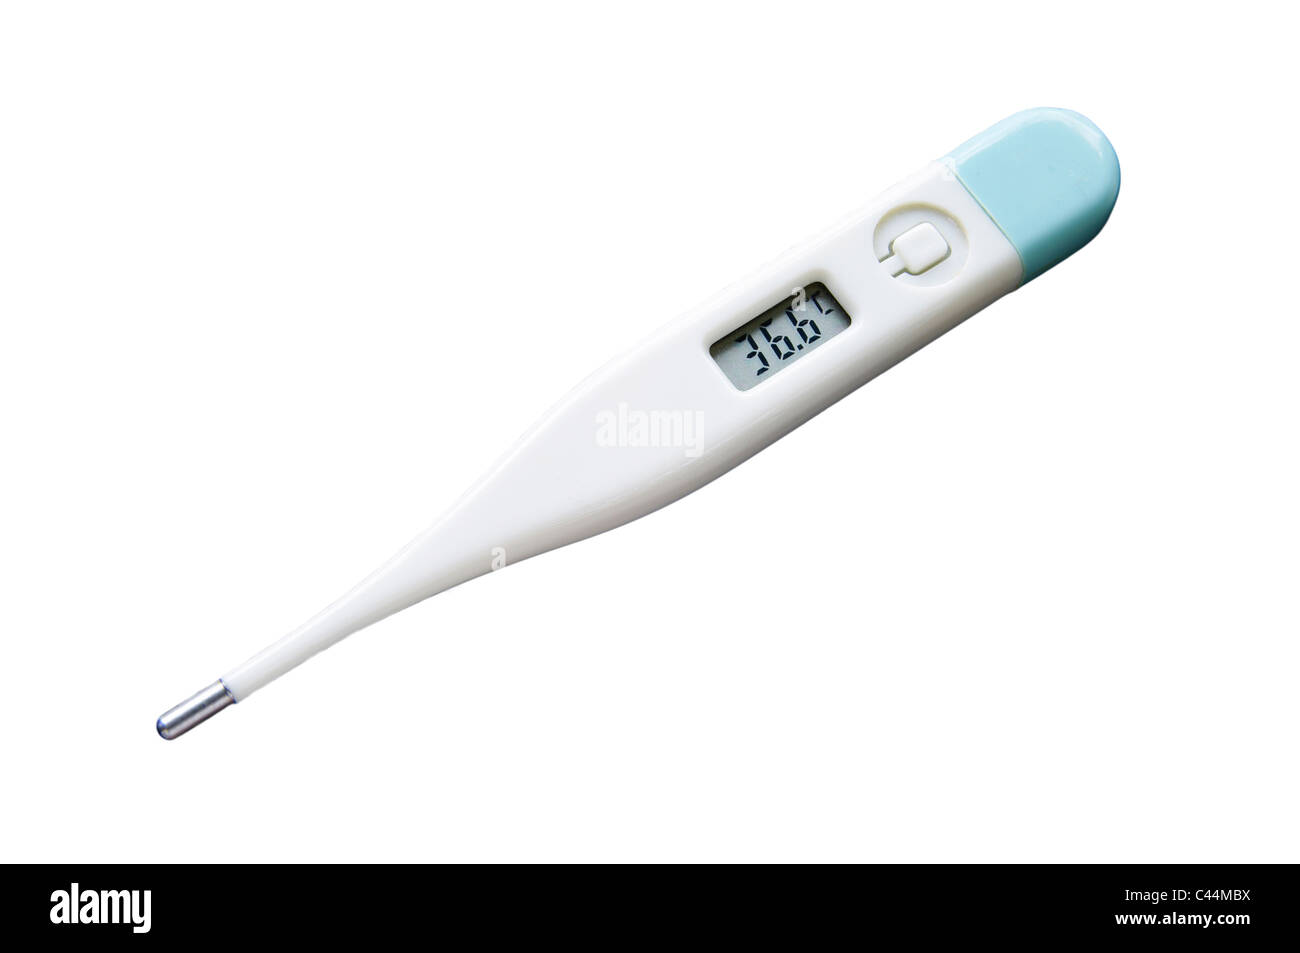 https://c8.alamy.com/comp/C44MBX/digital-thermometer-showing-body-temperature-in-degree-celsius-C44MBX.jpg